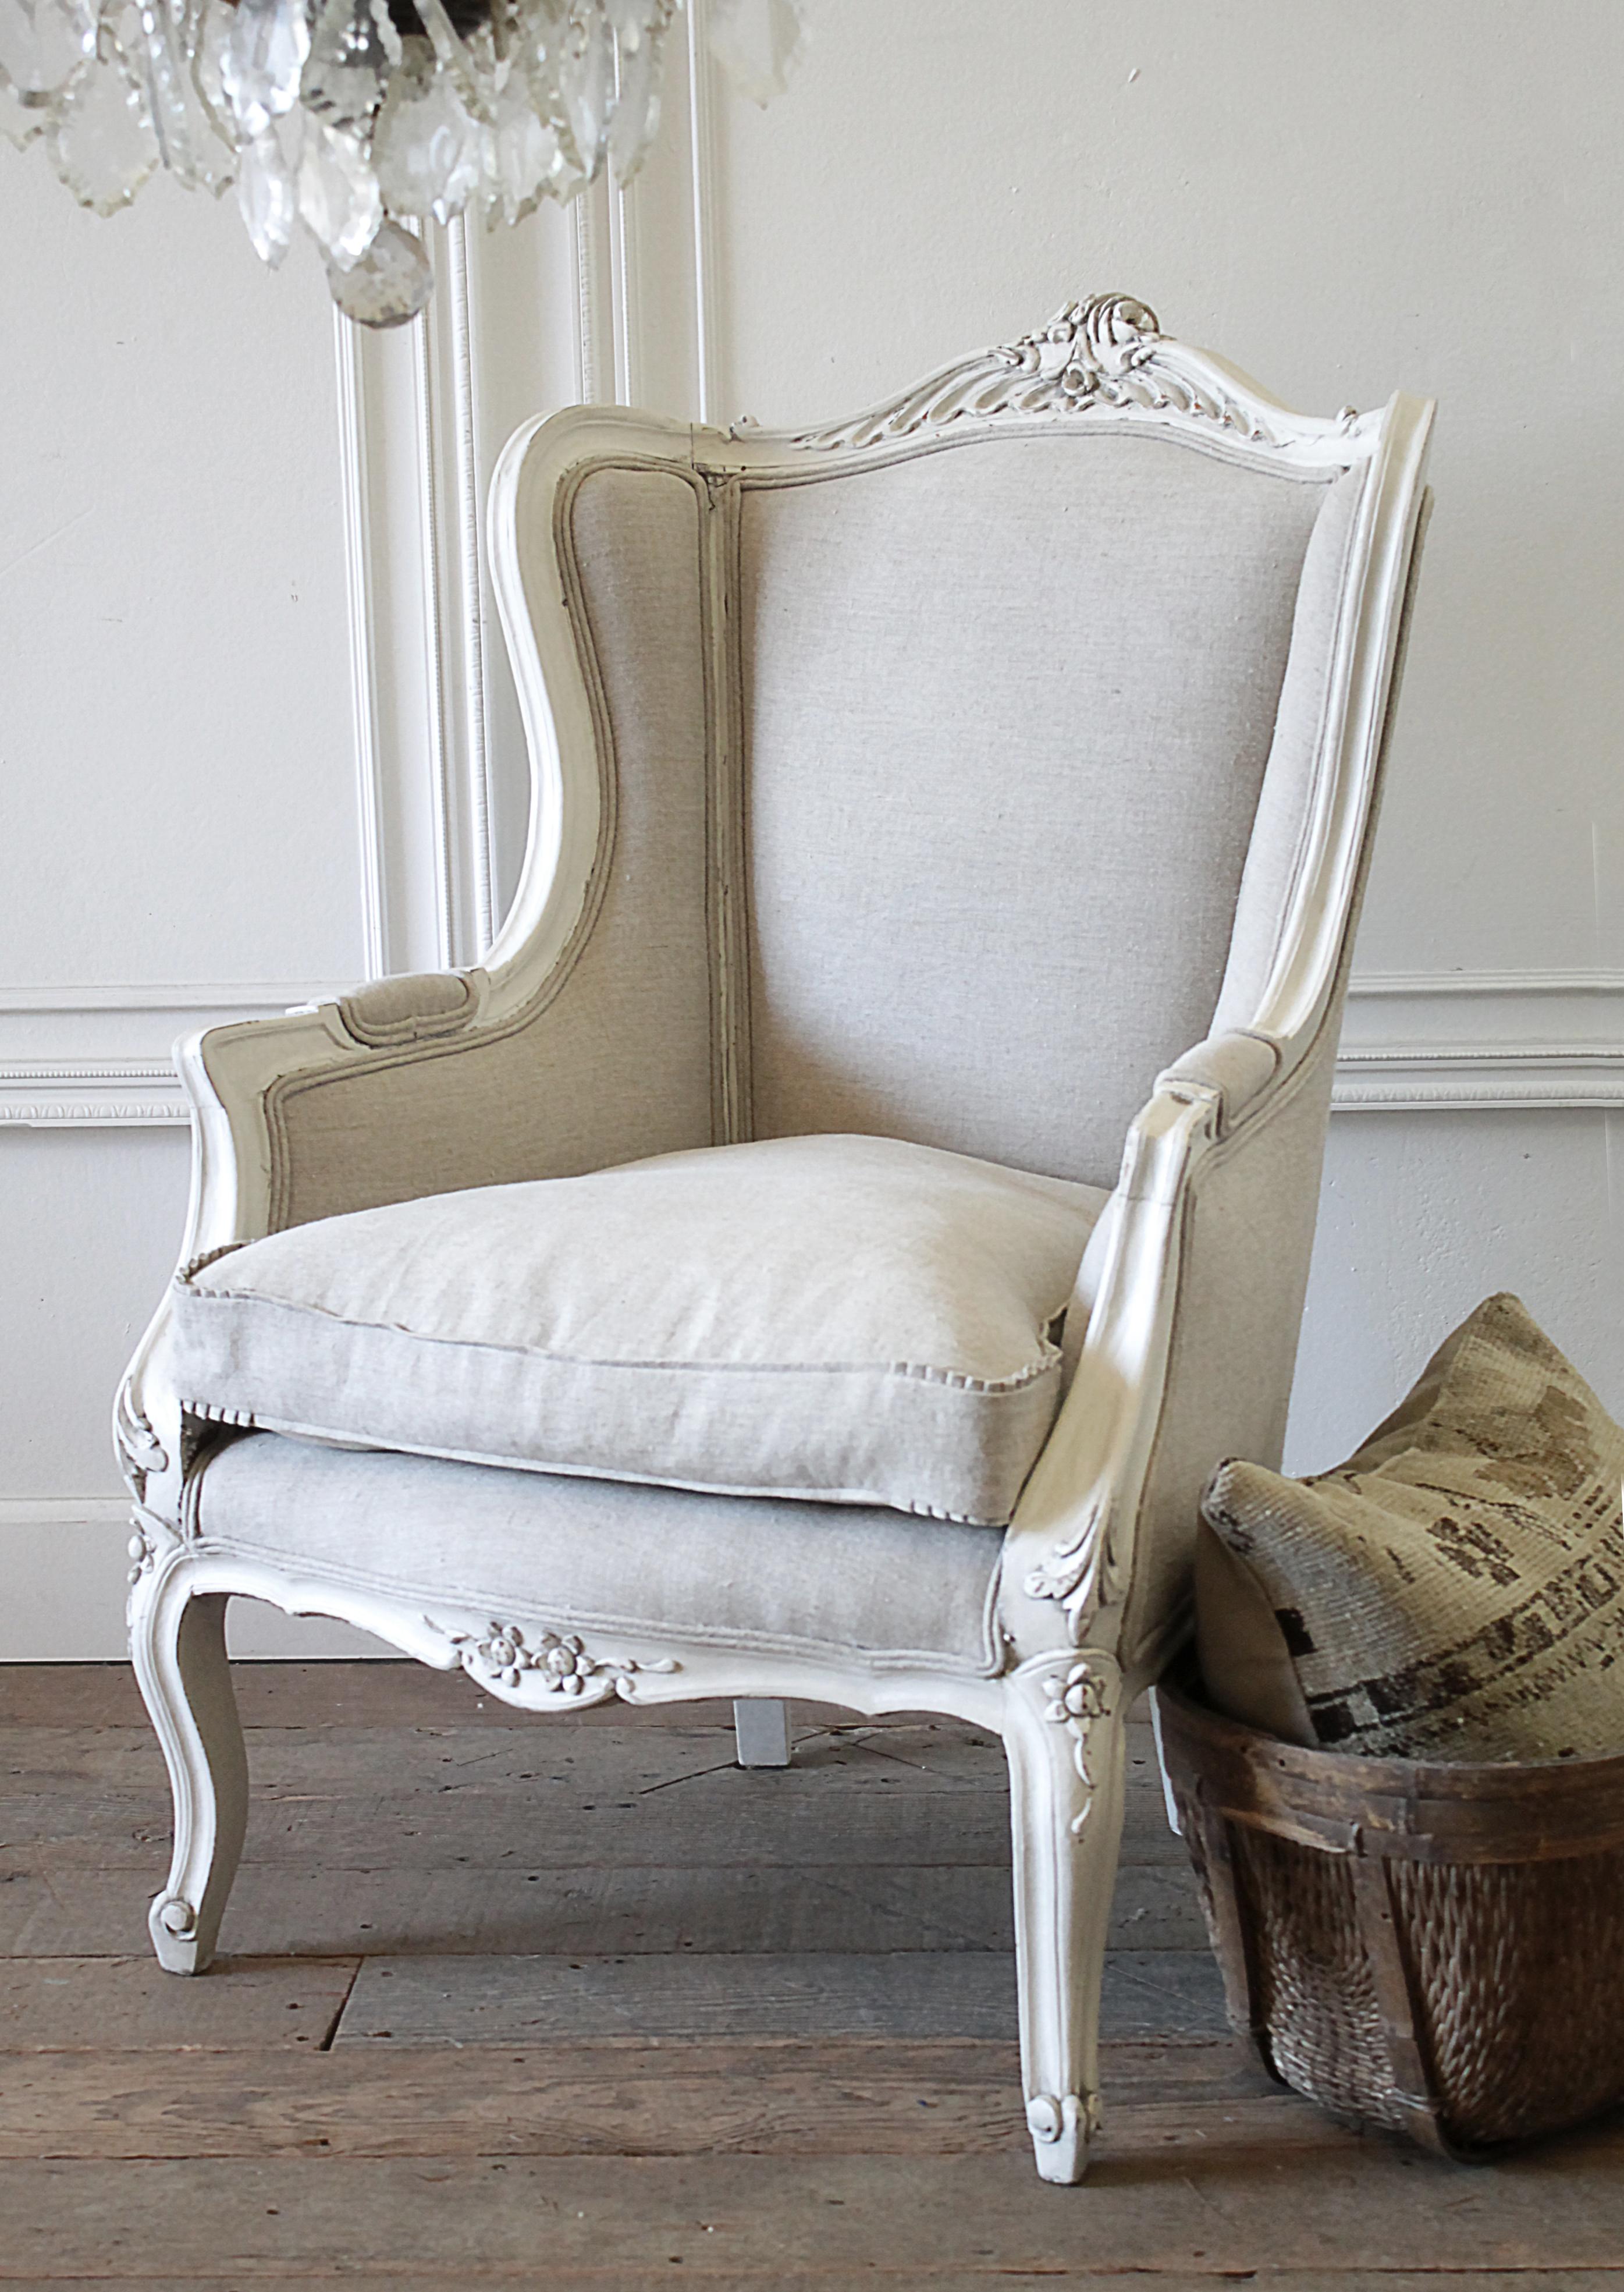 European 20th Century Louis XV Style Wing Back Chair New Belgian Linen Upholstery